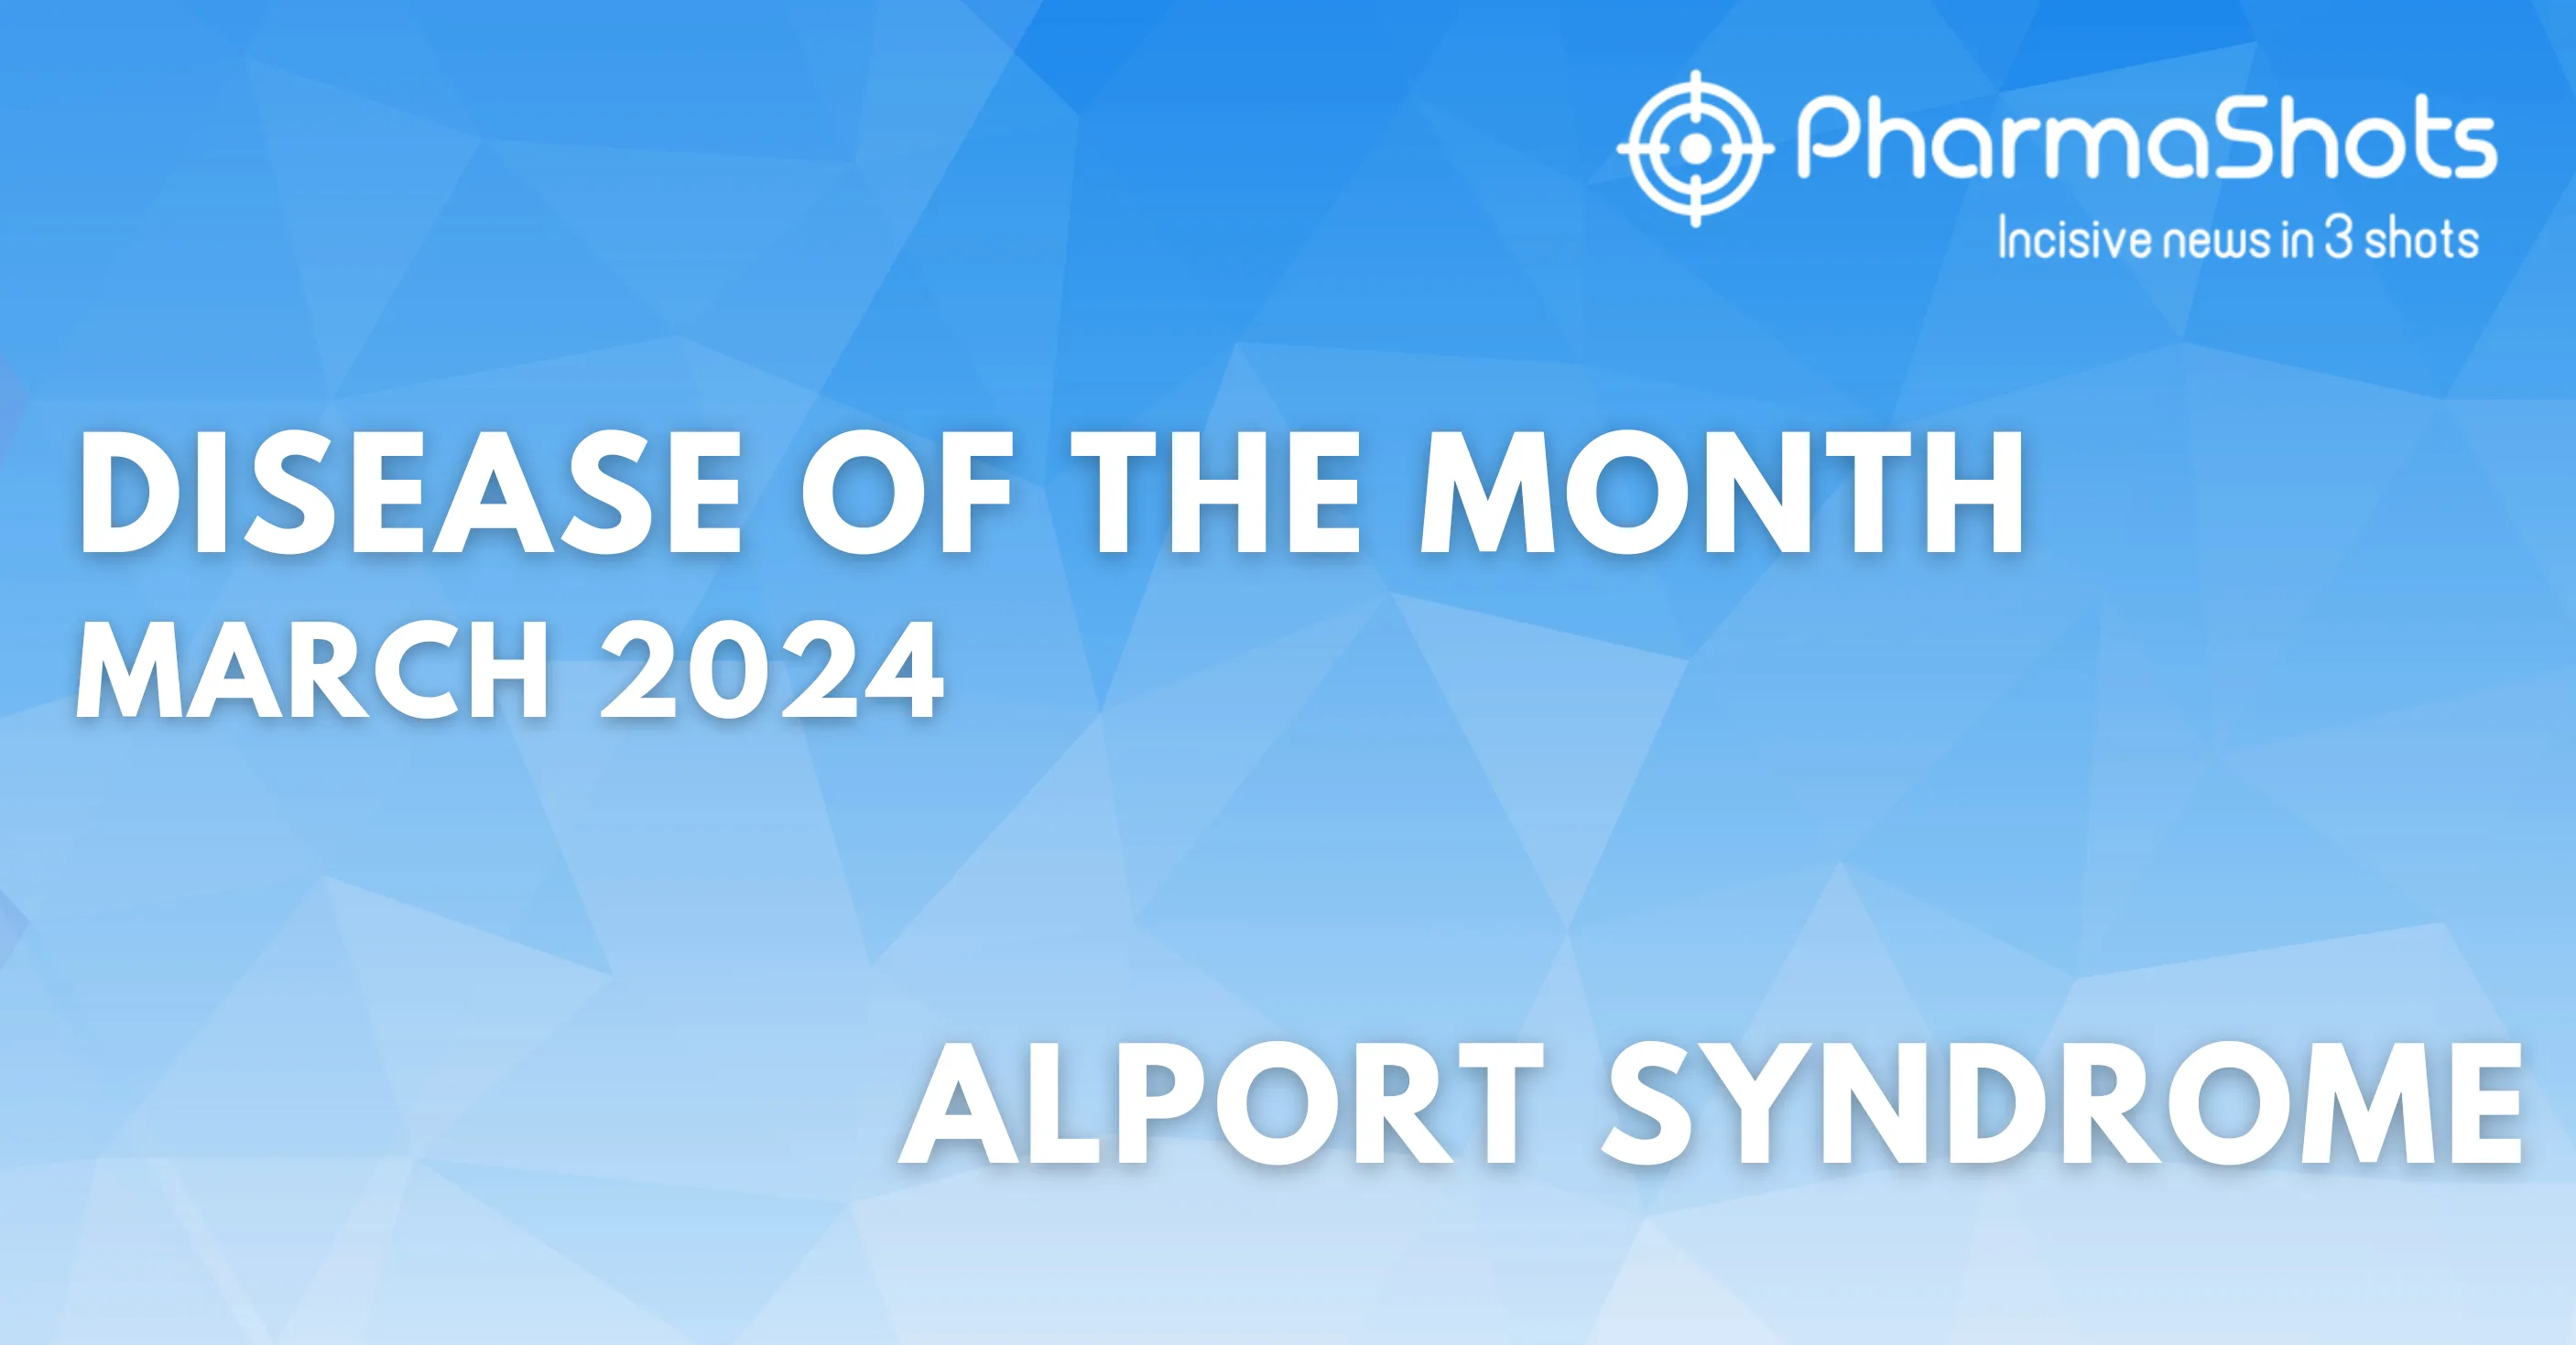 Disease of the Month - Alport Syndrome